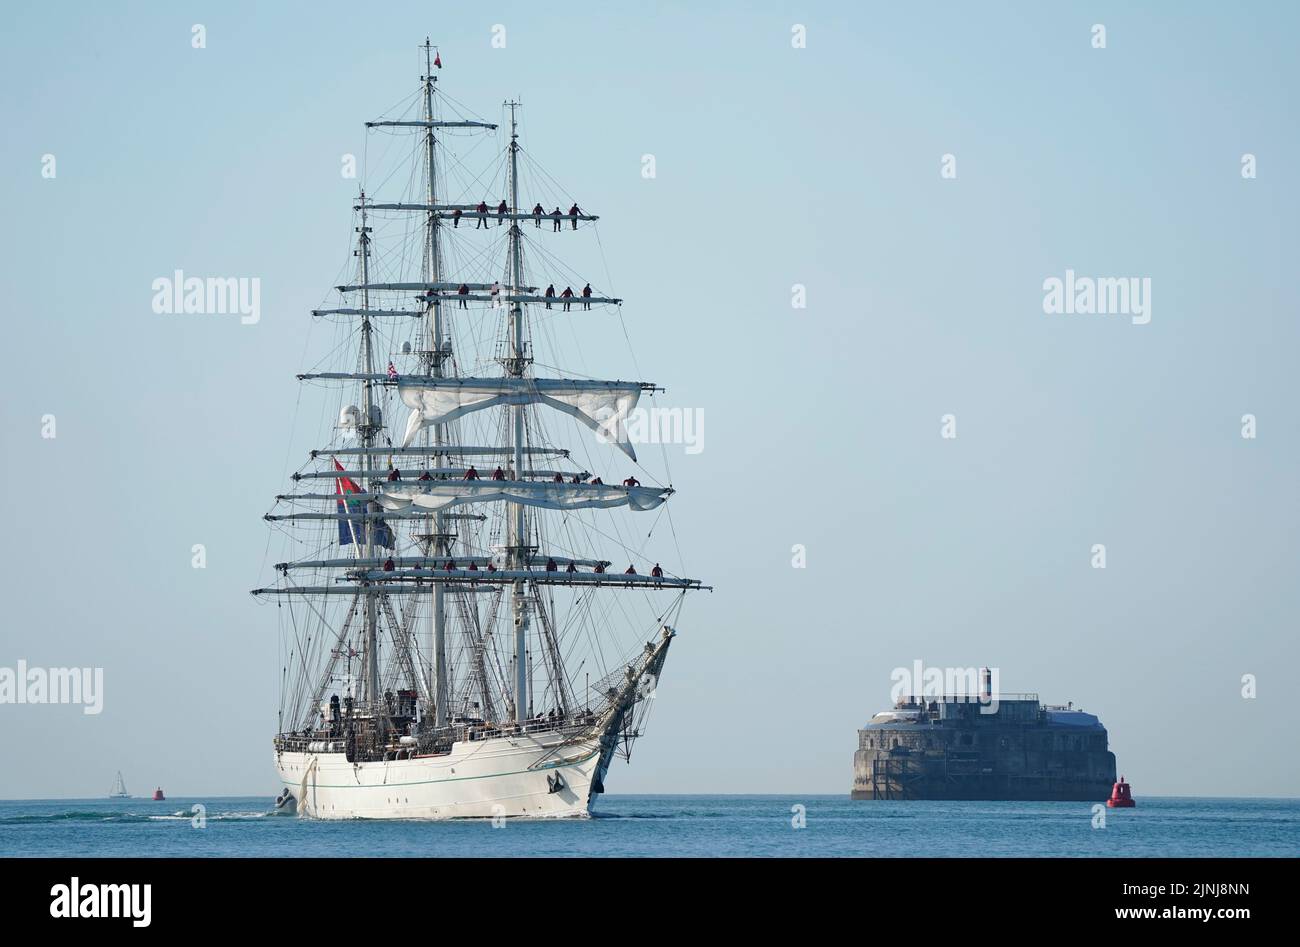 The vessel Shabab Oman II, a full-rigged training ship of the Royal Navy of Oman, passes Spitbank Fort as kit arrives into Portsmouth Harbour. The ship is a blend of the traditional and modern with state of the art computerised communication systems and navigation equipment, but from the wooden decking upwards, the ship is traditional in terms of her sails and rigging. Picture date: Friday August 12, 2022. Stock Photo